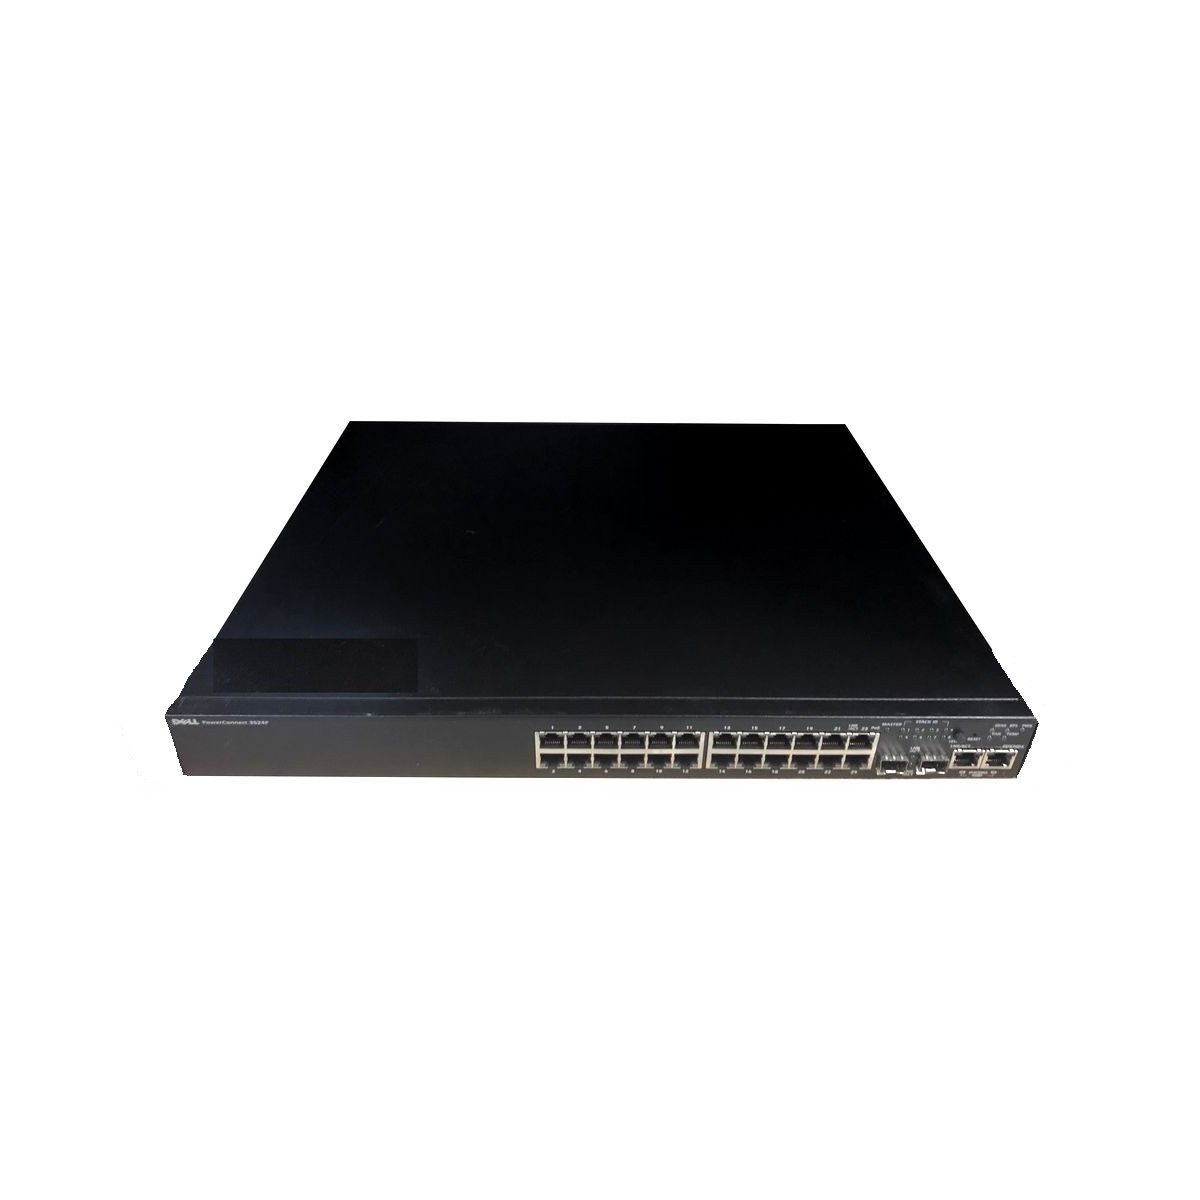 SWITCH DELL POWERCONNECT 3524 24x10/100 2xSFP